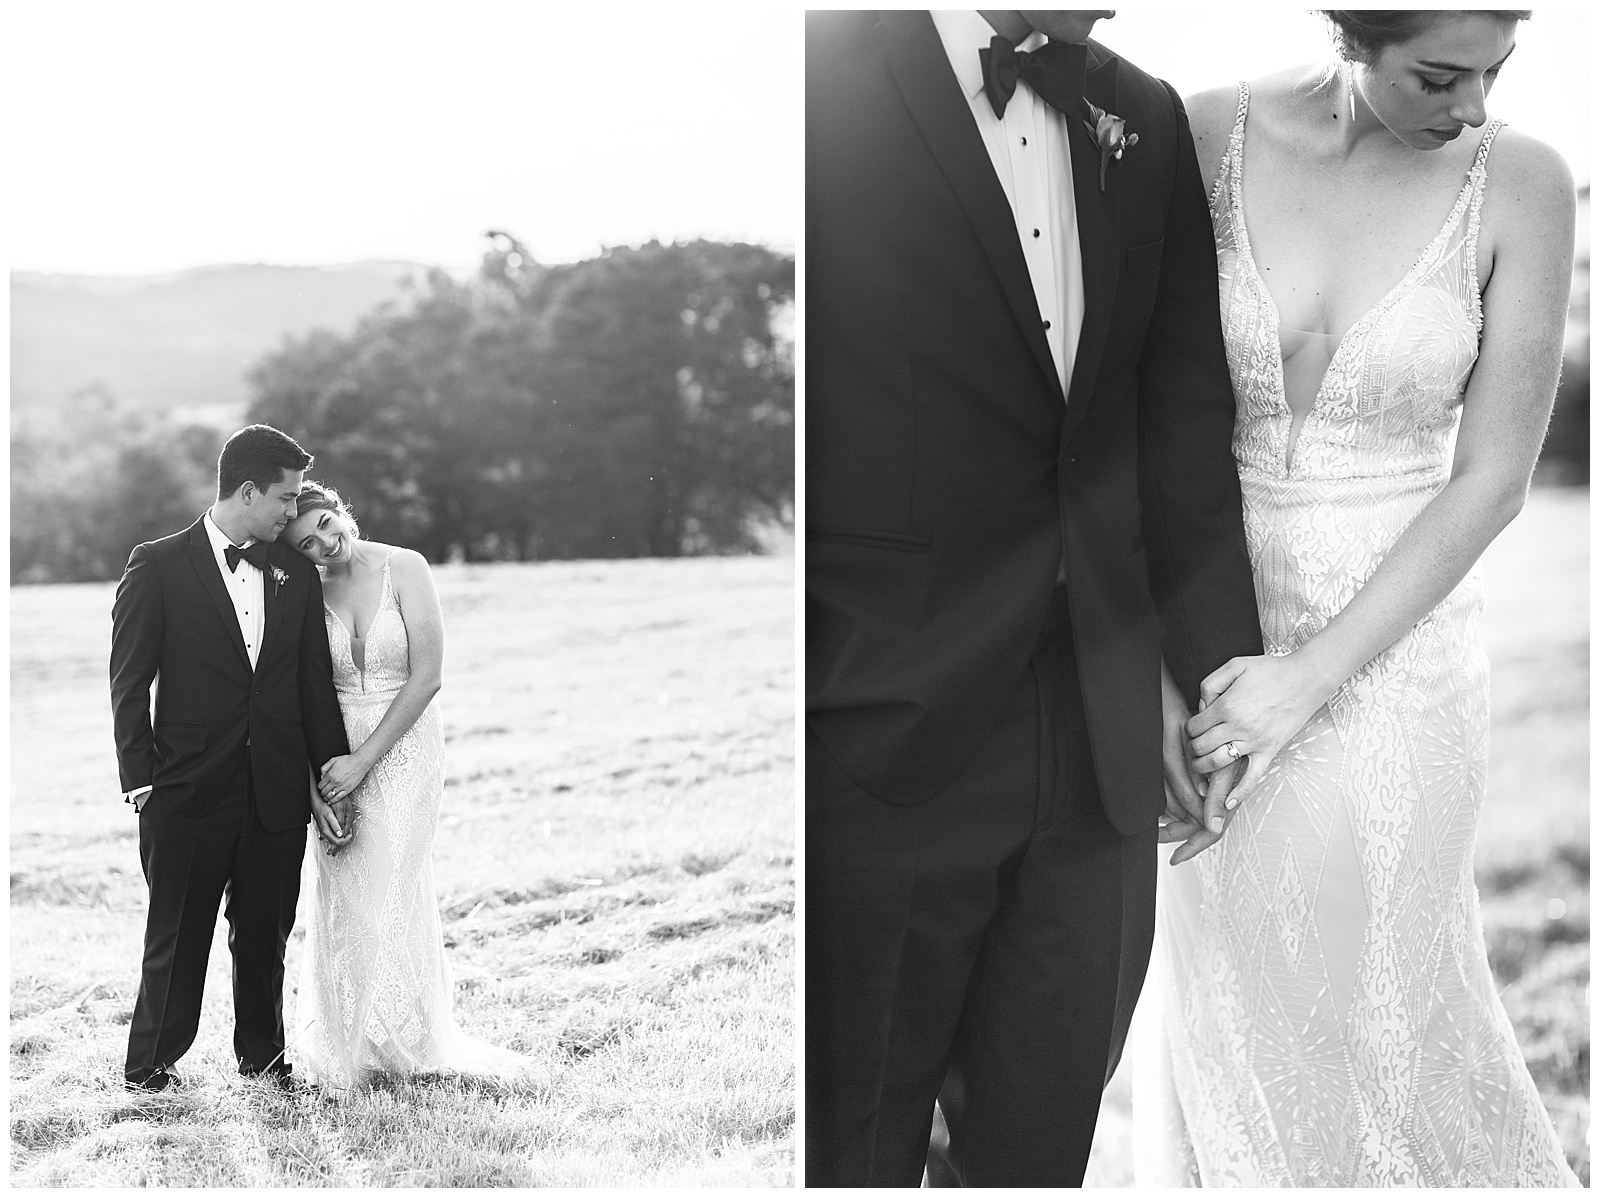 Bride and Groom Portraits in field black and white images at susnet. Bride holding grooms hands